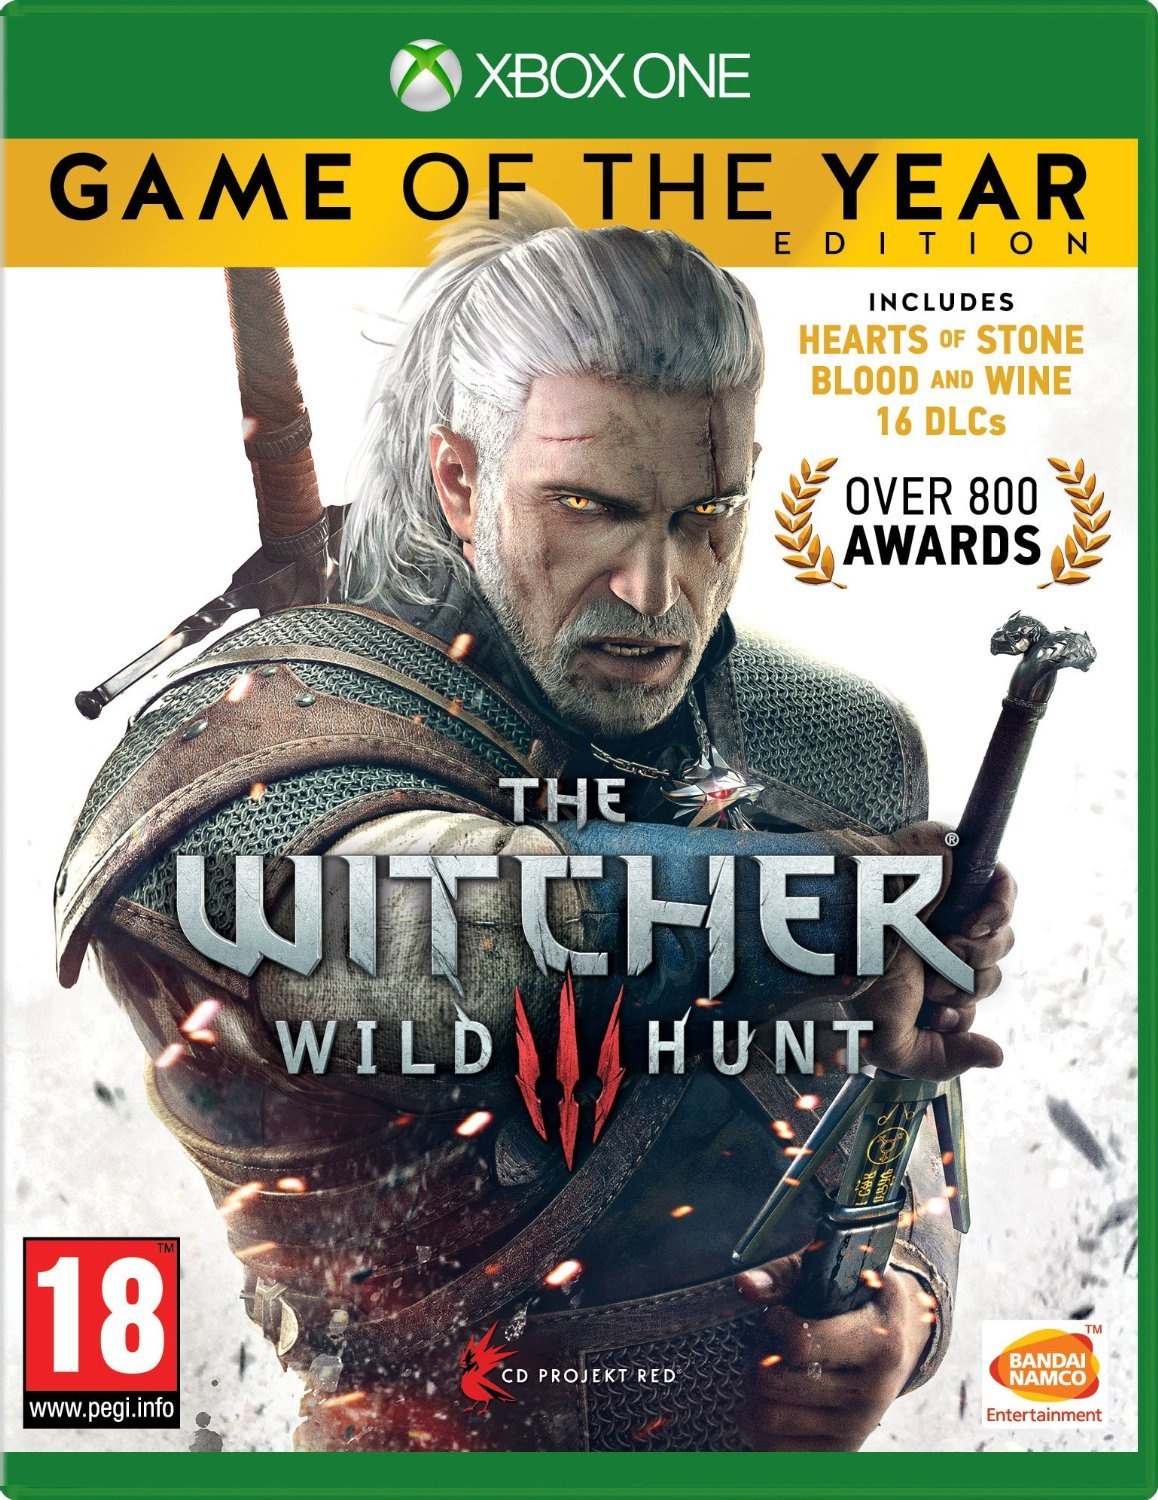 Bandai Namco, BANDAI NAMCO Entertainment The Witcher 3: Wild Hunt Game of the Year Edition, Xbox One